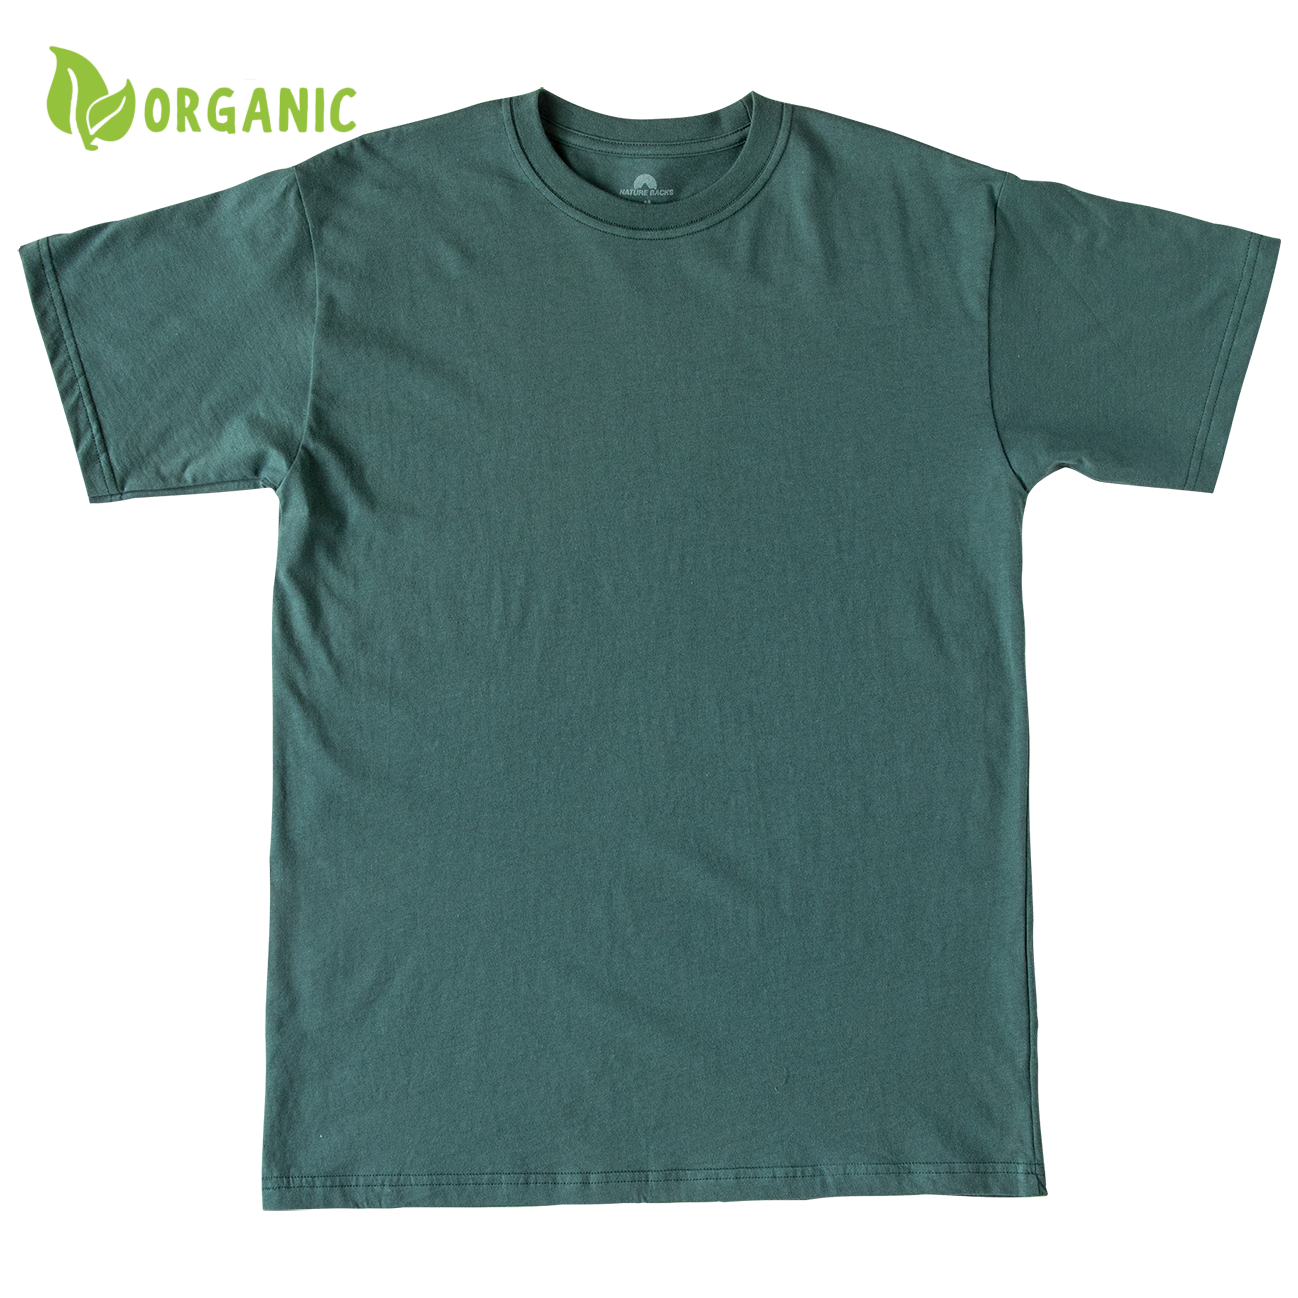 Nature Backs Short Sleeve 100% Organic Cotton T-Shirt | Minimalist Spruce Short Sleeve made with Eco-Friendly Fibers Sustainably made in the USA 